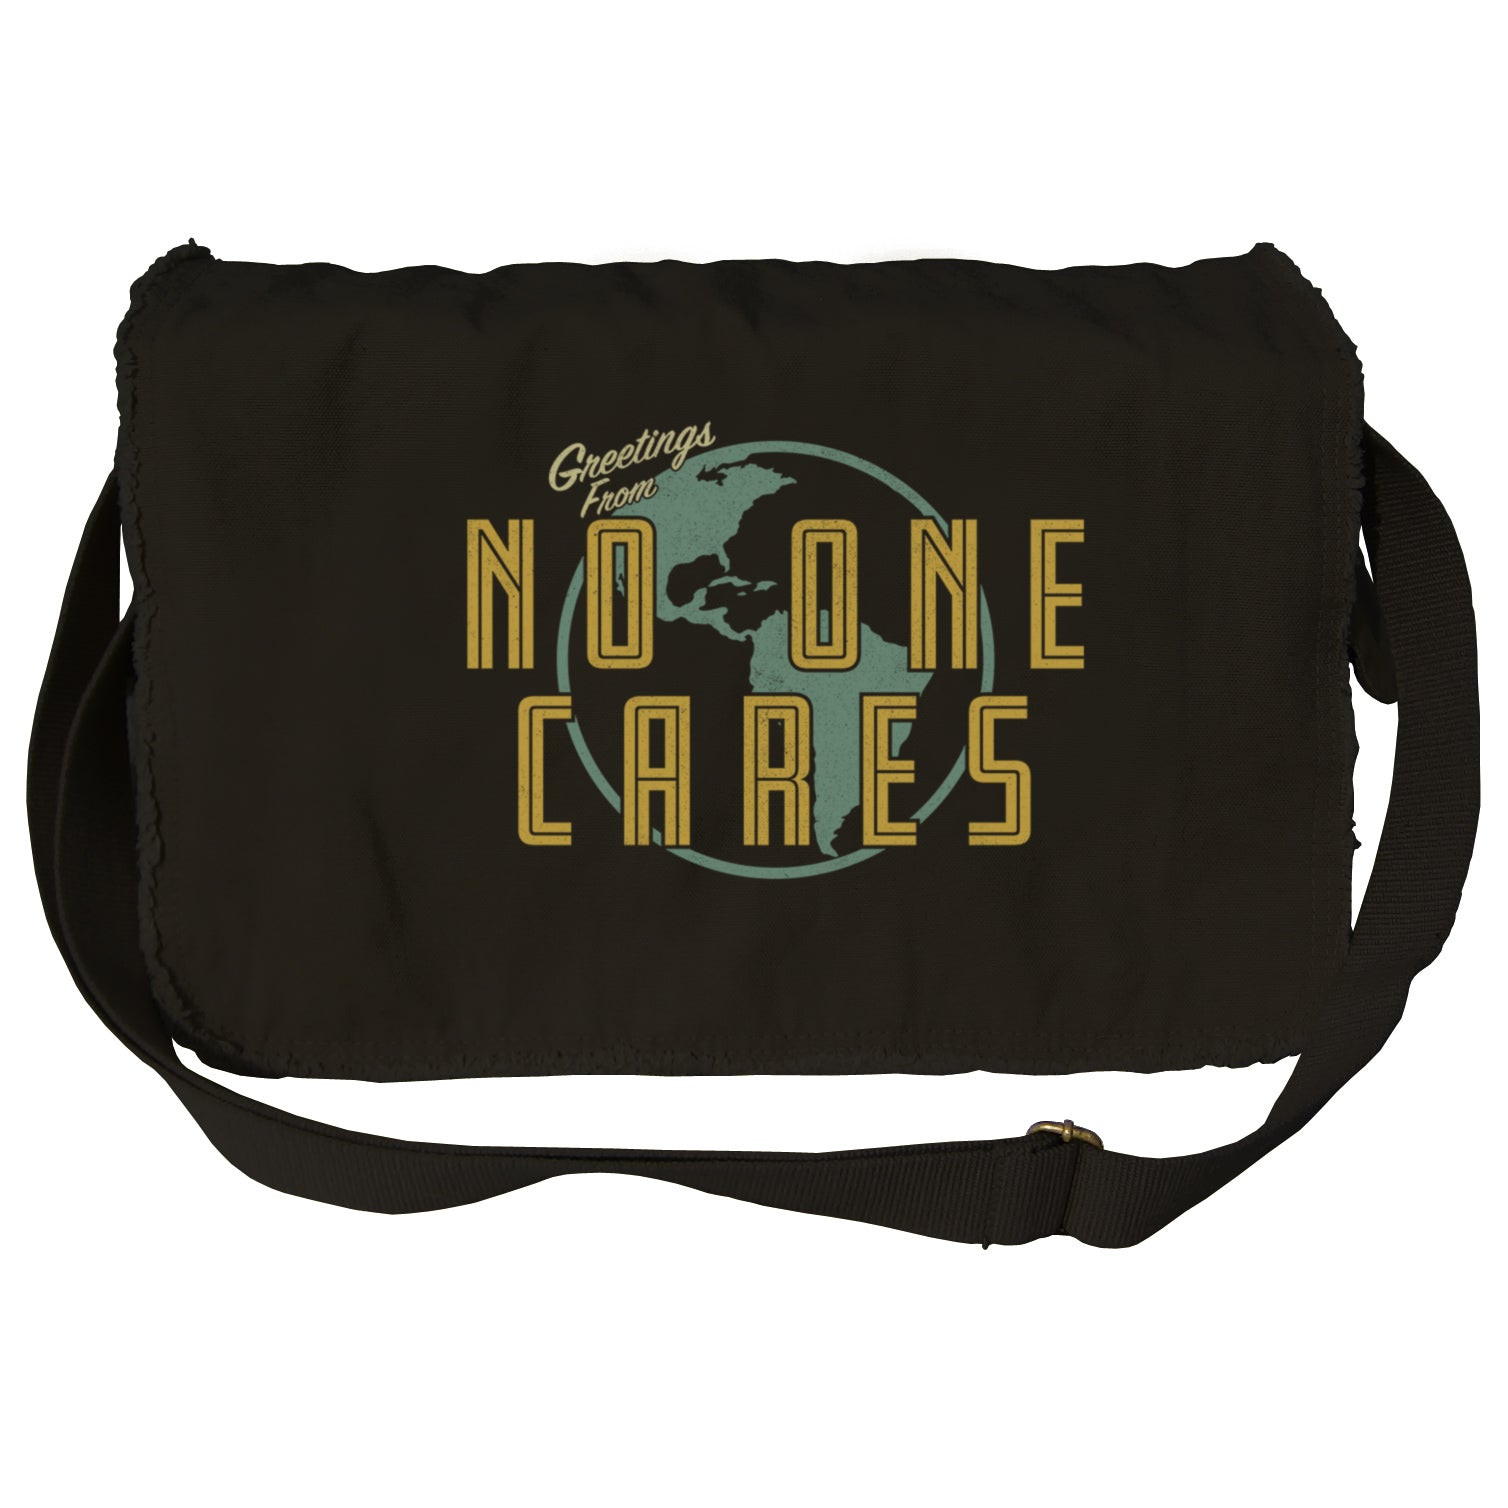 Greetings From No One Cares Messenger Bag